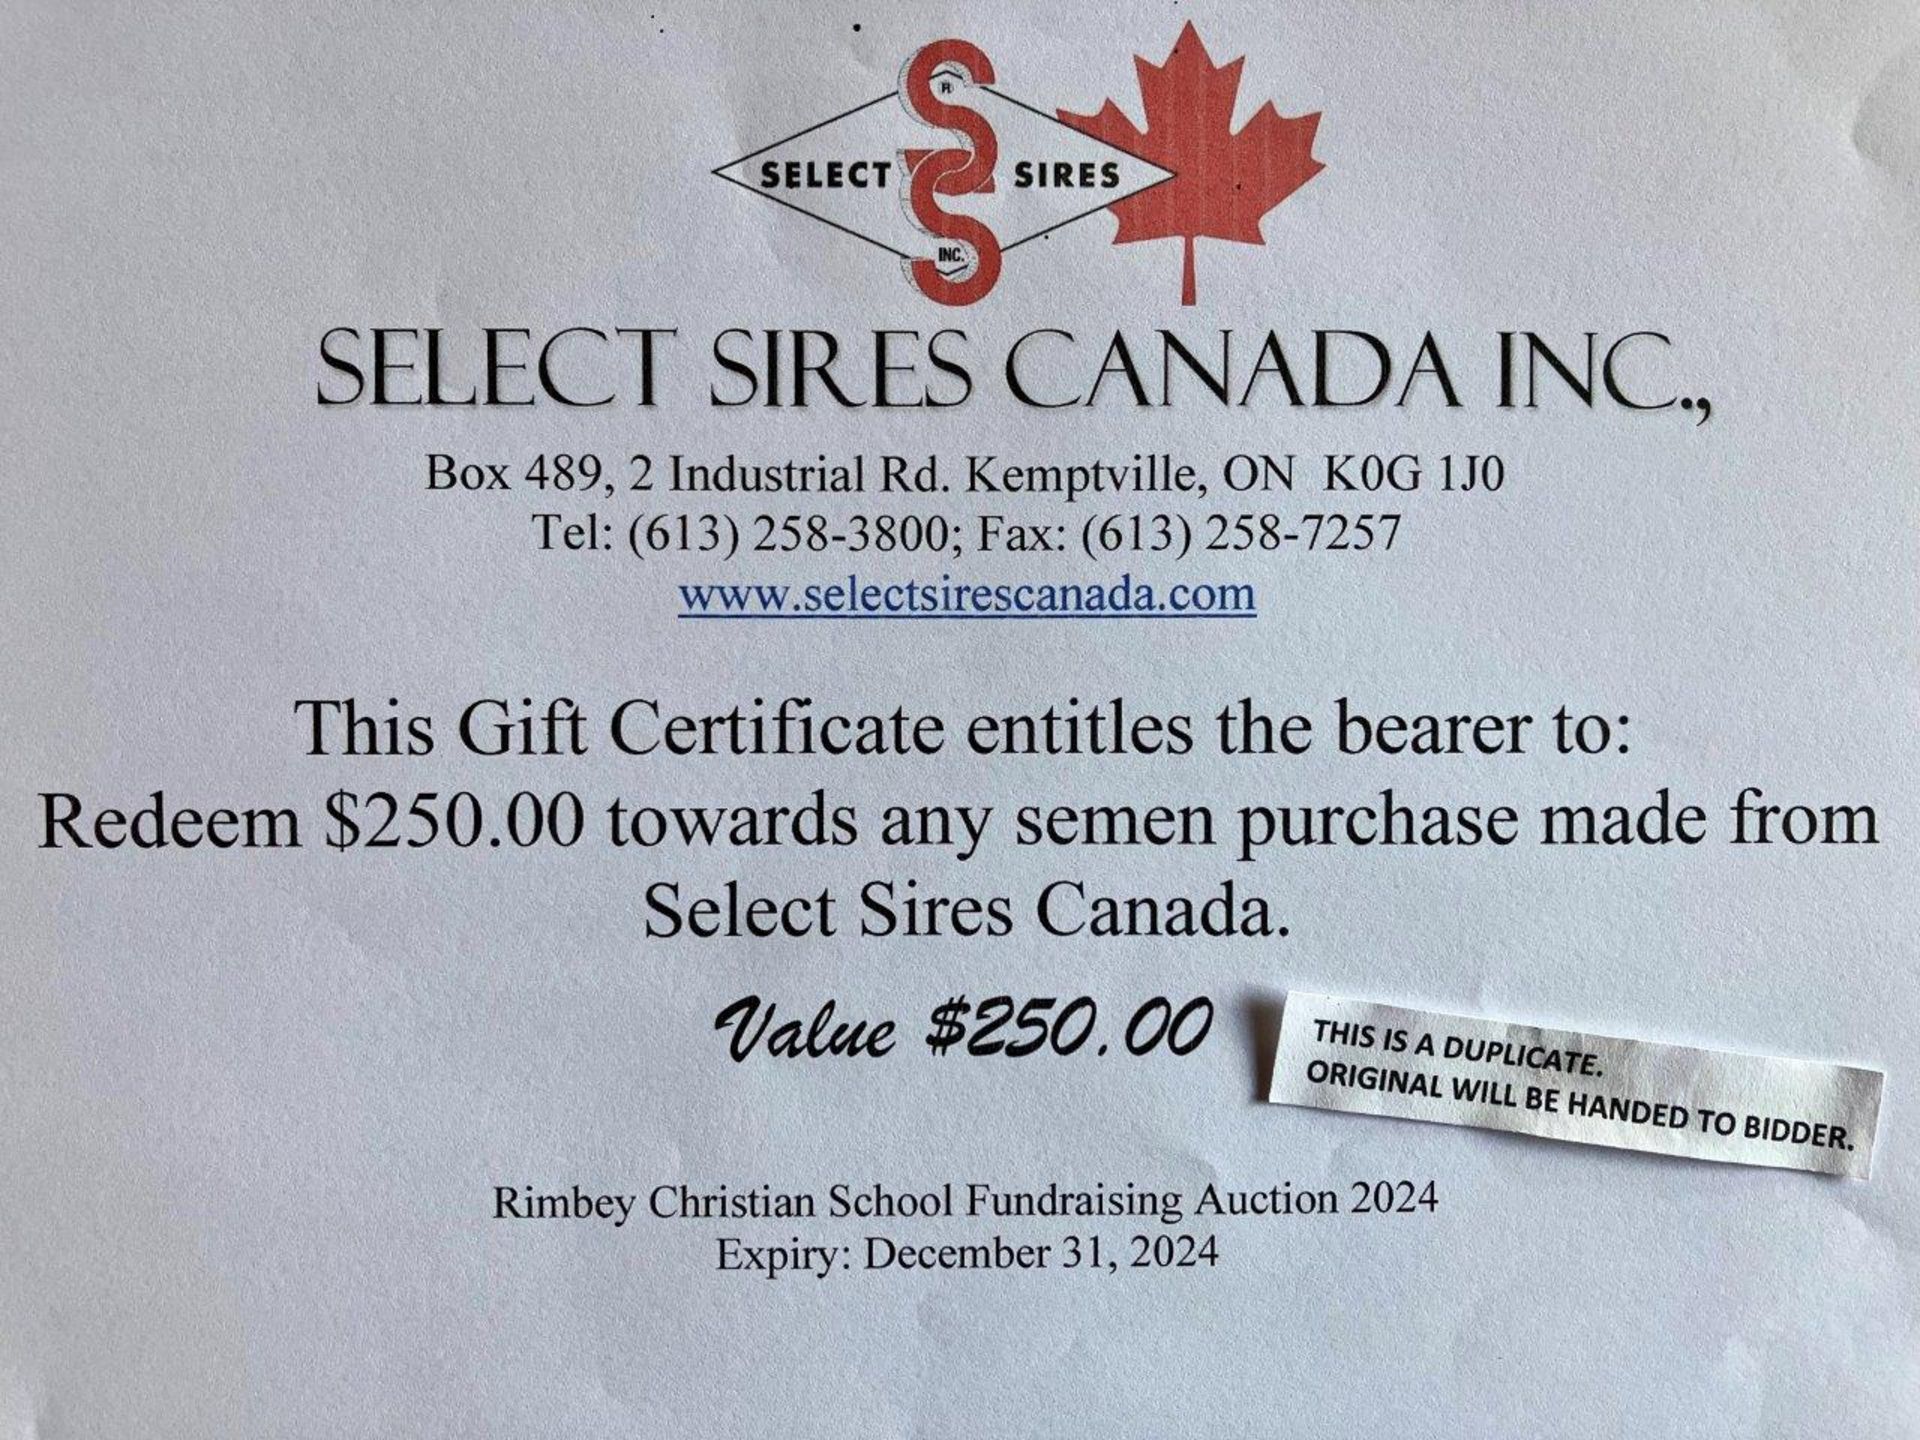 SELECT SIRES CANADA $250.00 GIFT CERTIFICATE - Image 2 of 2